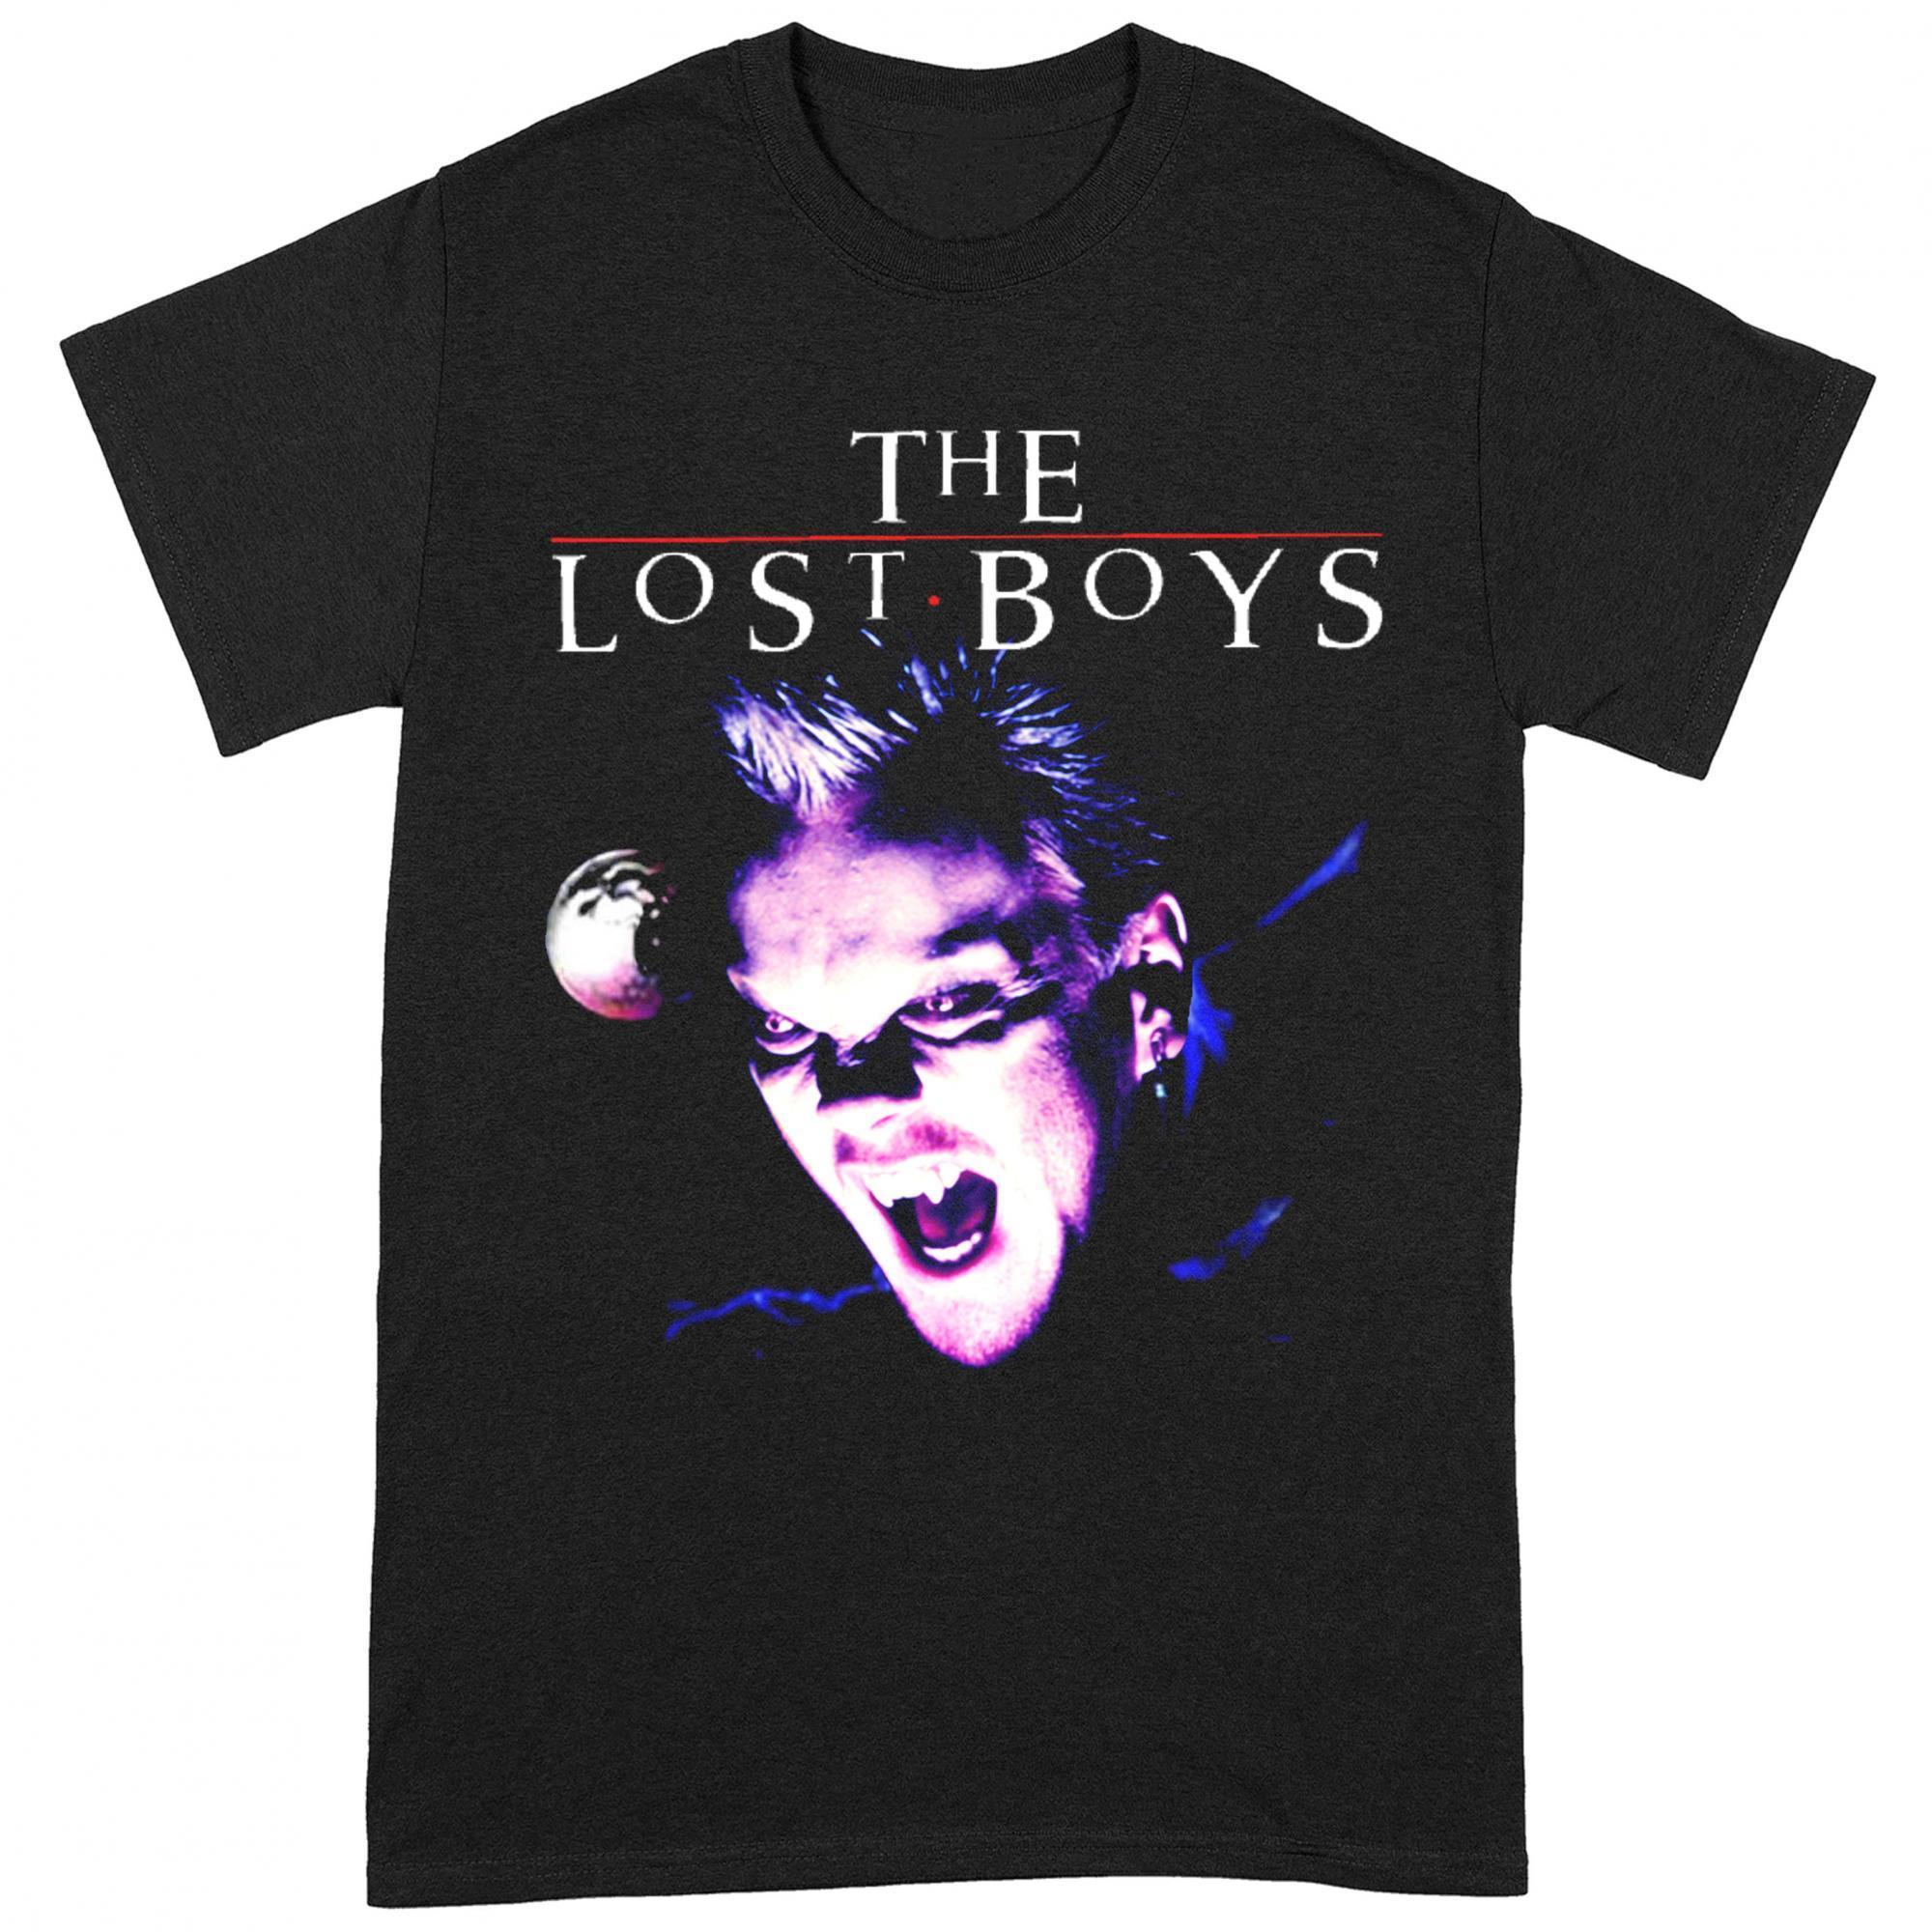 The Lost Boys Unisex Adult Snarl Tinted T-Shirt (Black/Purple/White) (L)